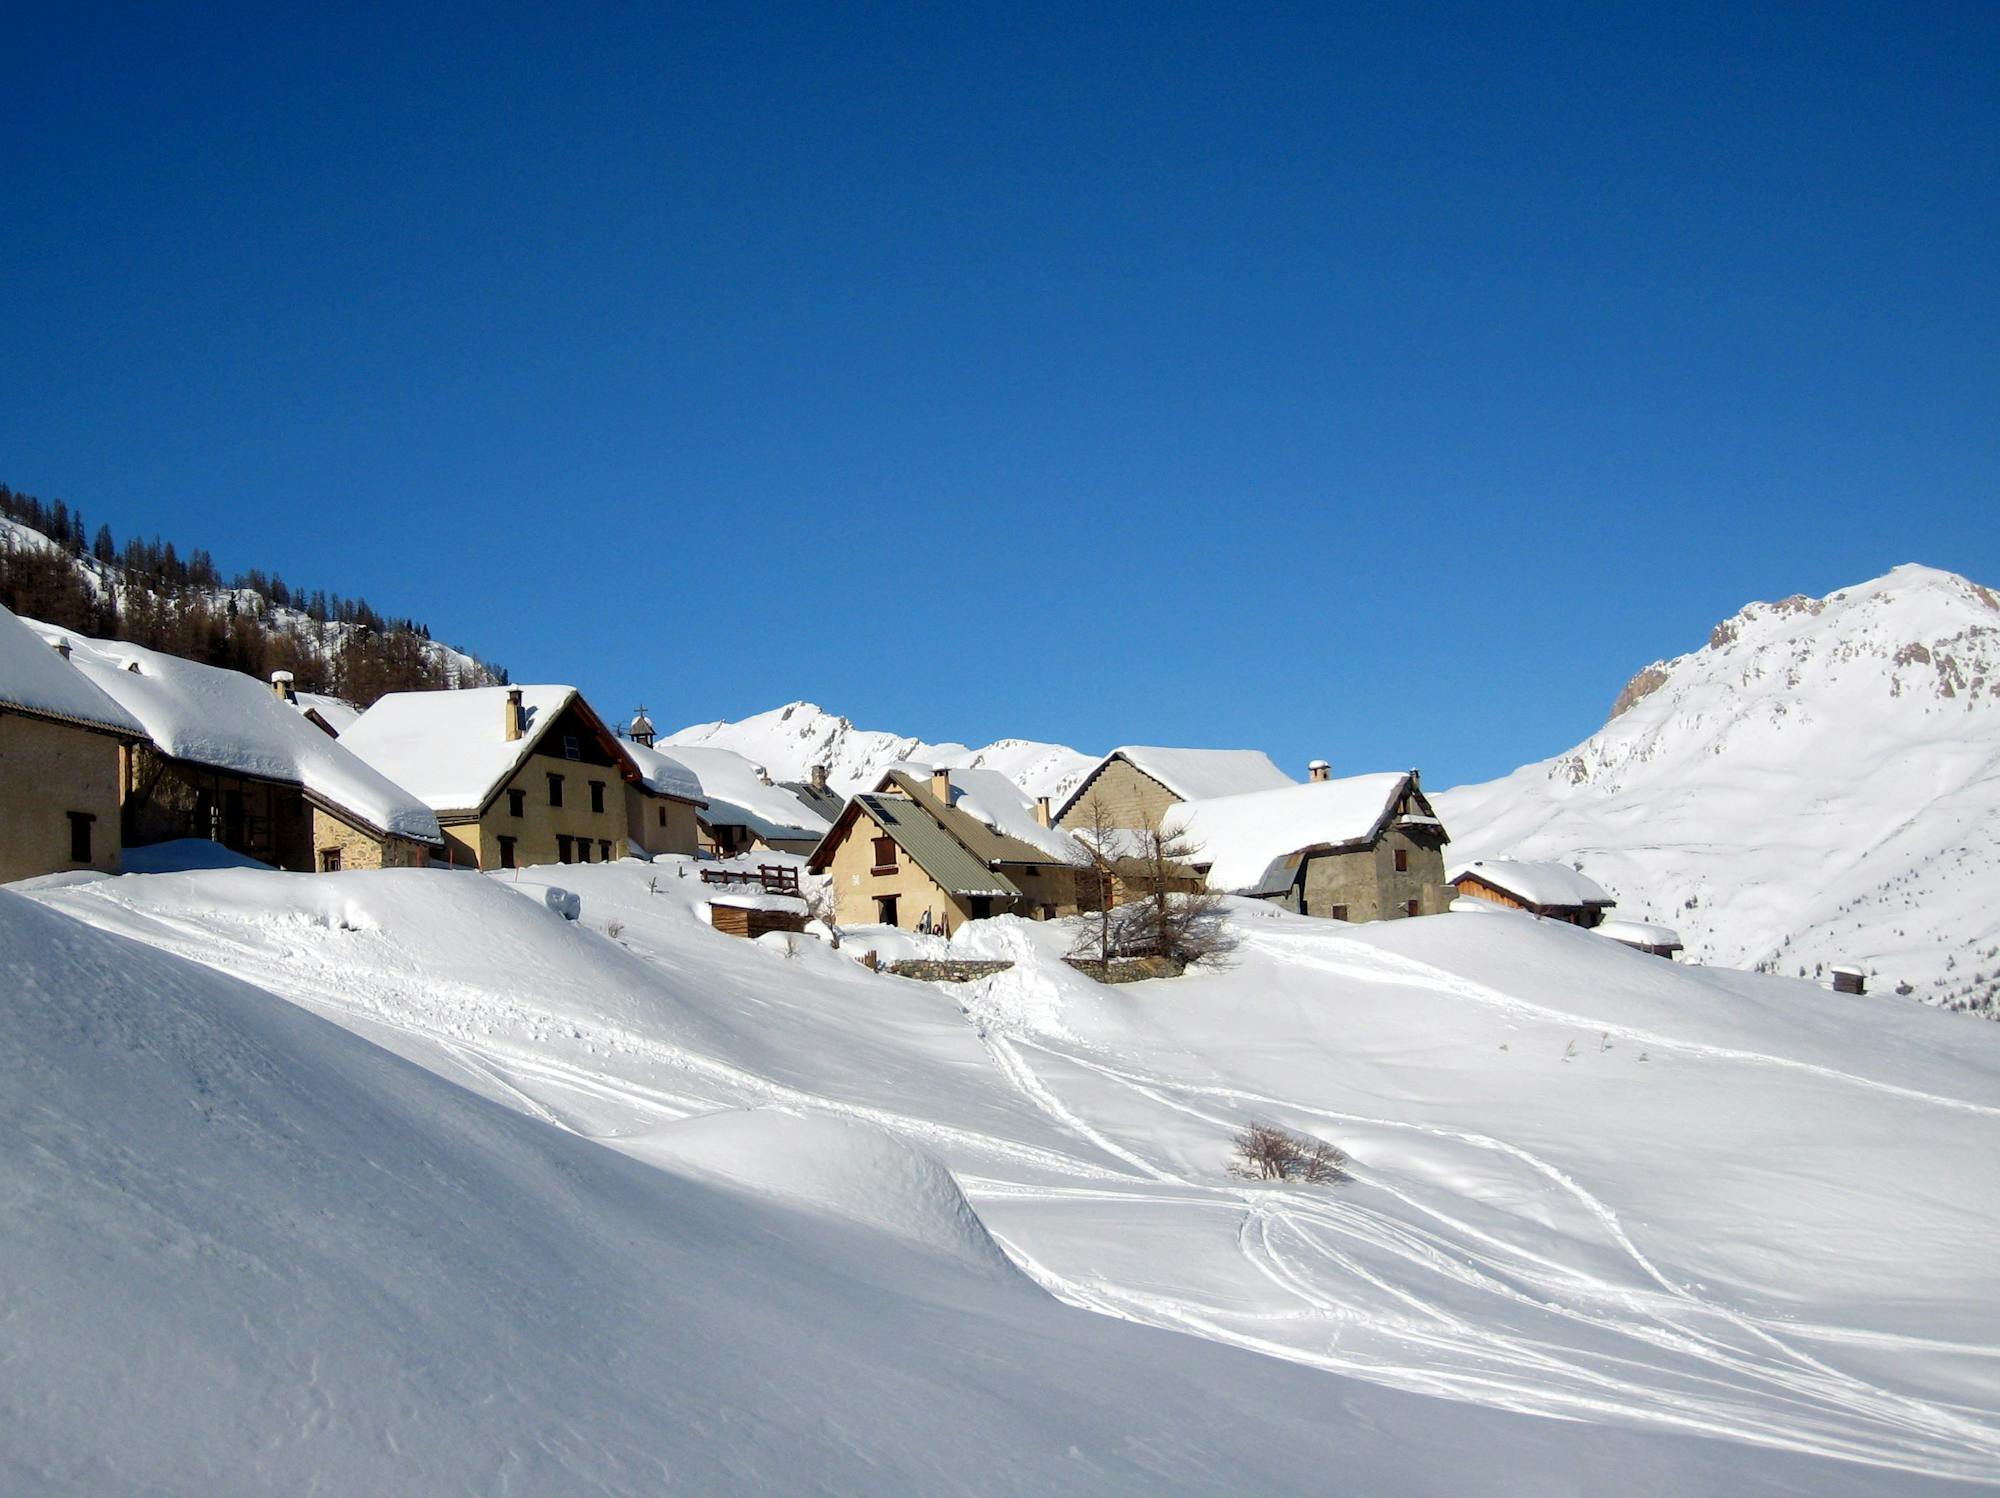 Beautiful snow in a beautiful place - welcome to Serre Chevalier!